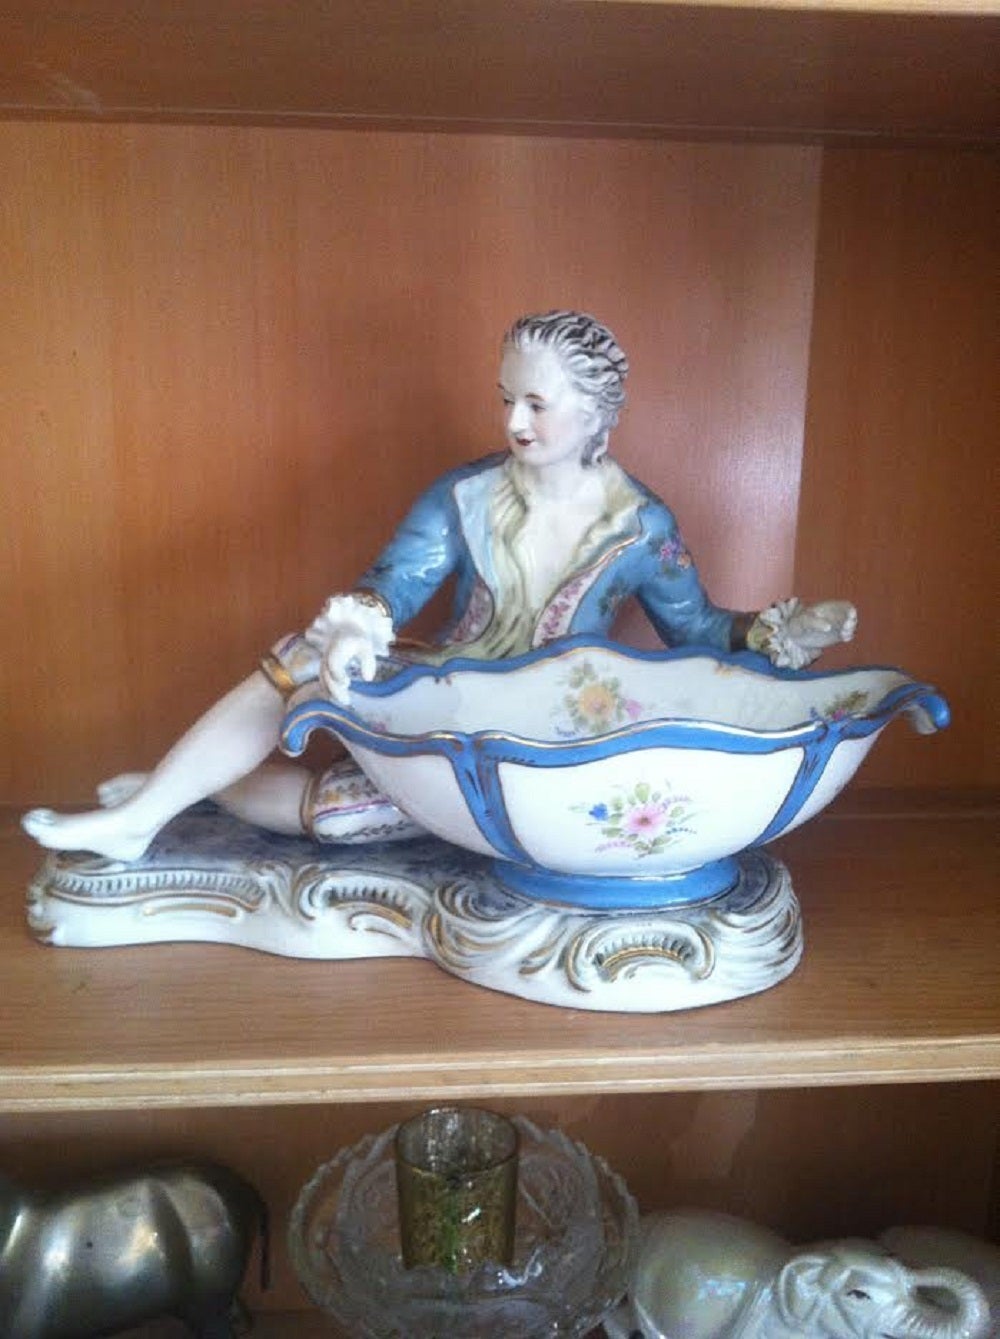 Meissen Figure of a boy offering a sweetmeats bowl  / dish. Floral encrusted and painted with floral subjects. In excellent kept condition.